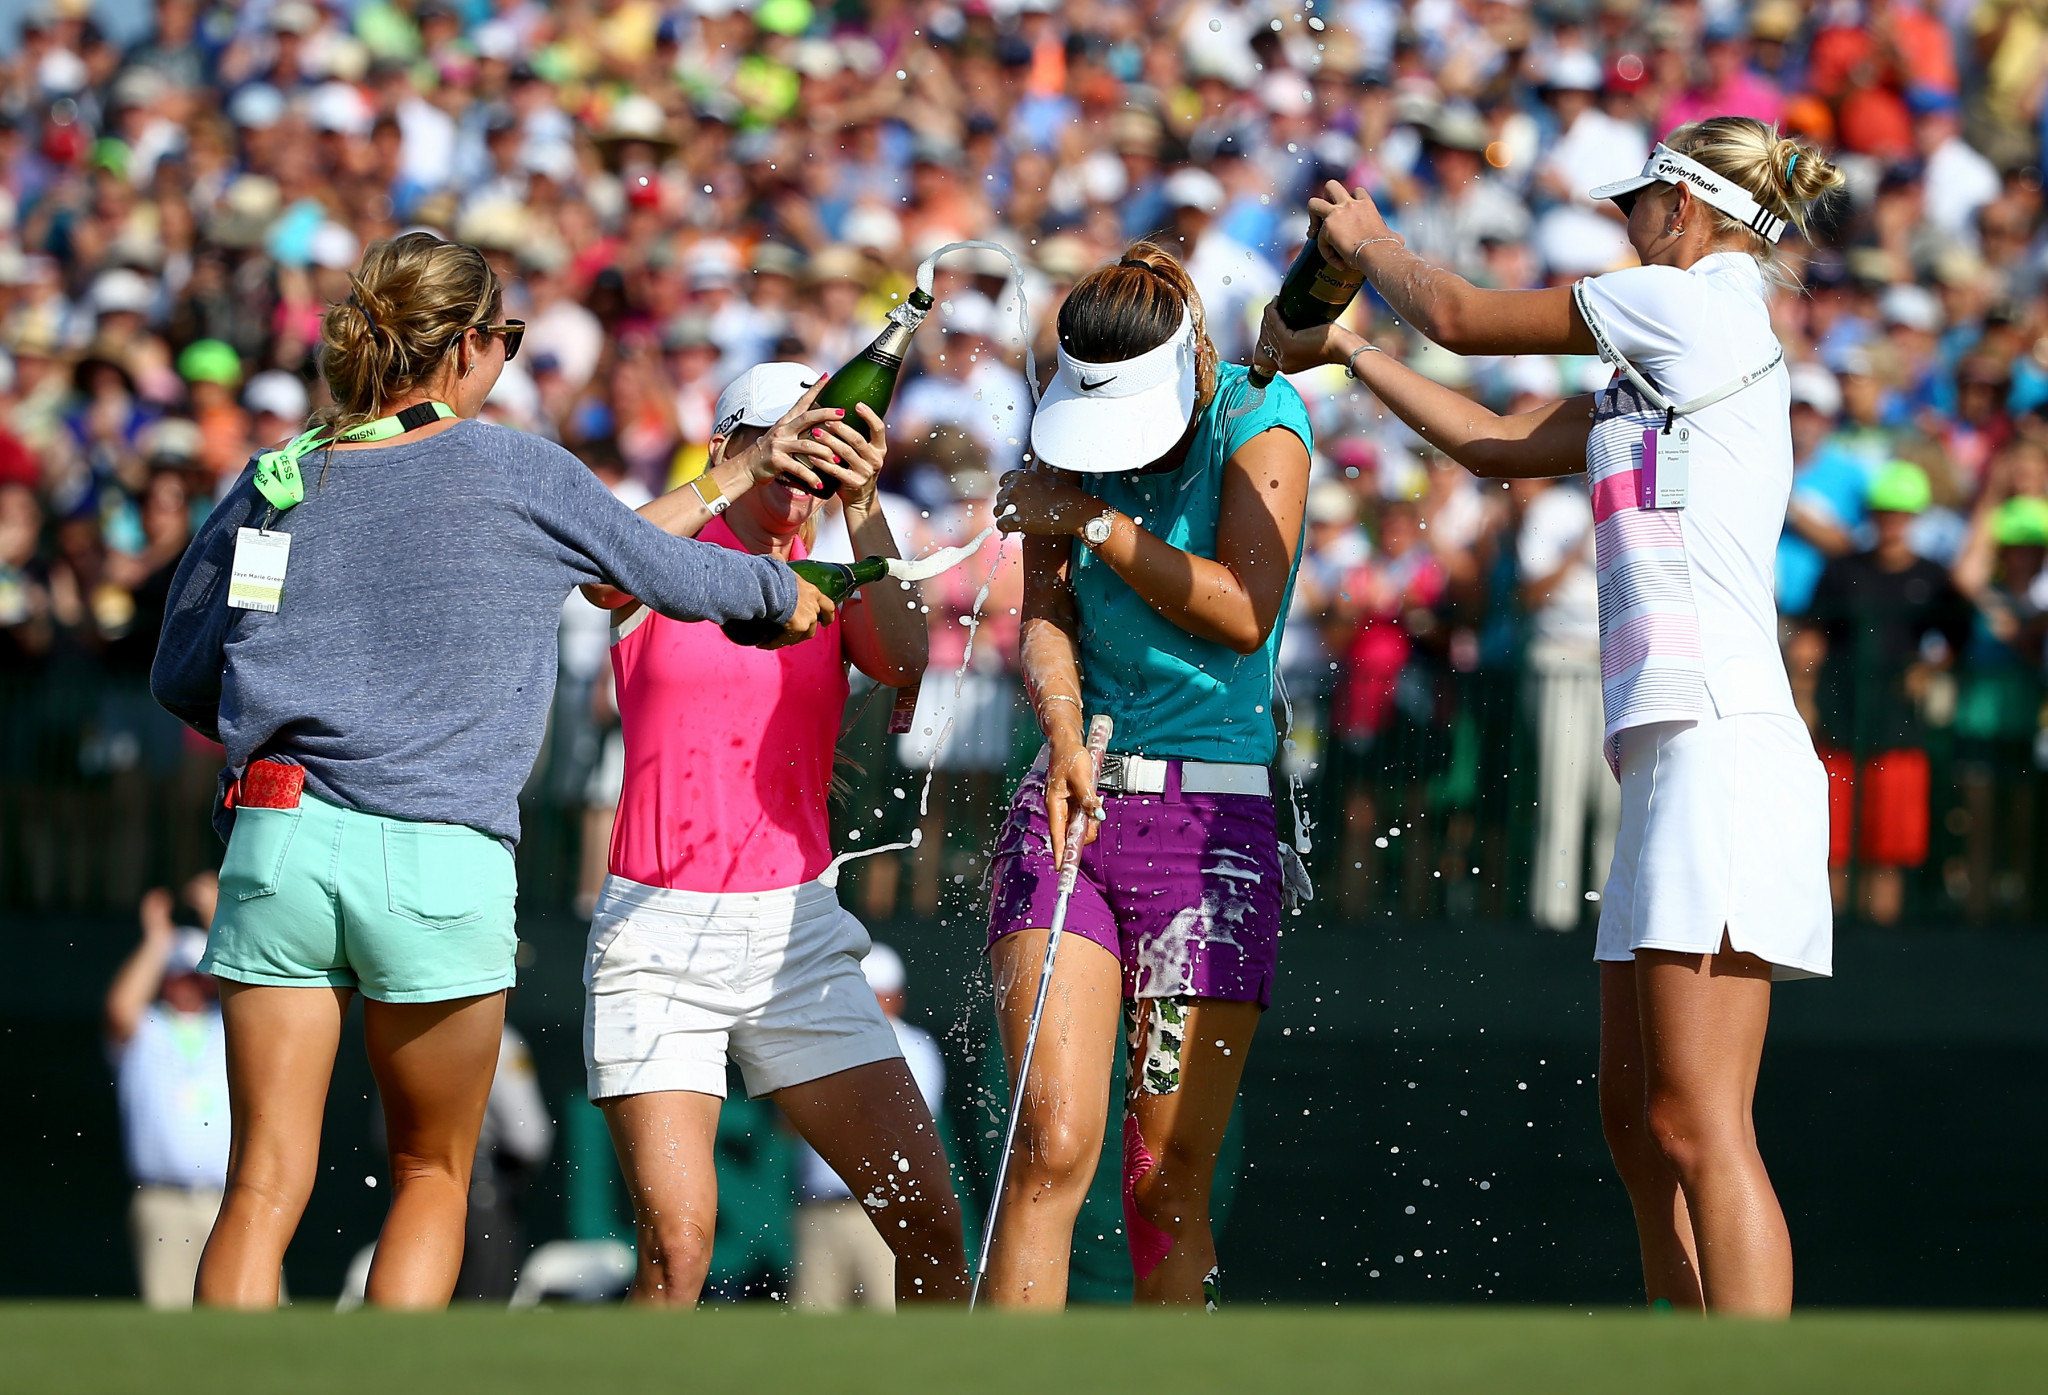 Michelle Wie West said winning the LPGA US Open in 2014 fulfilled a life's ambition ©Getty Images